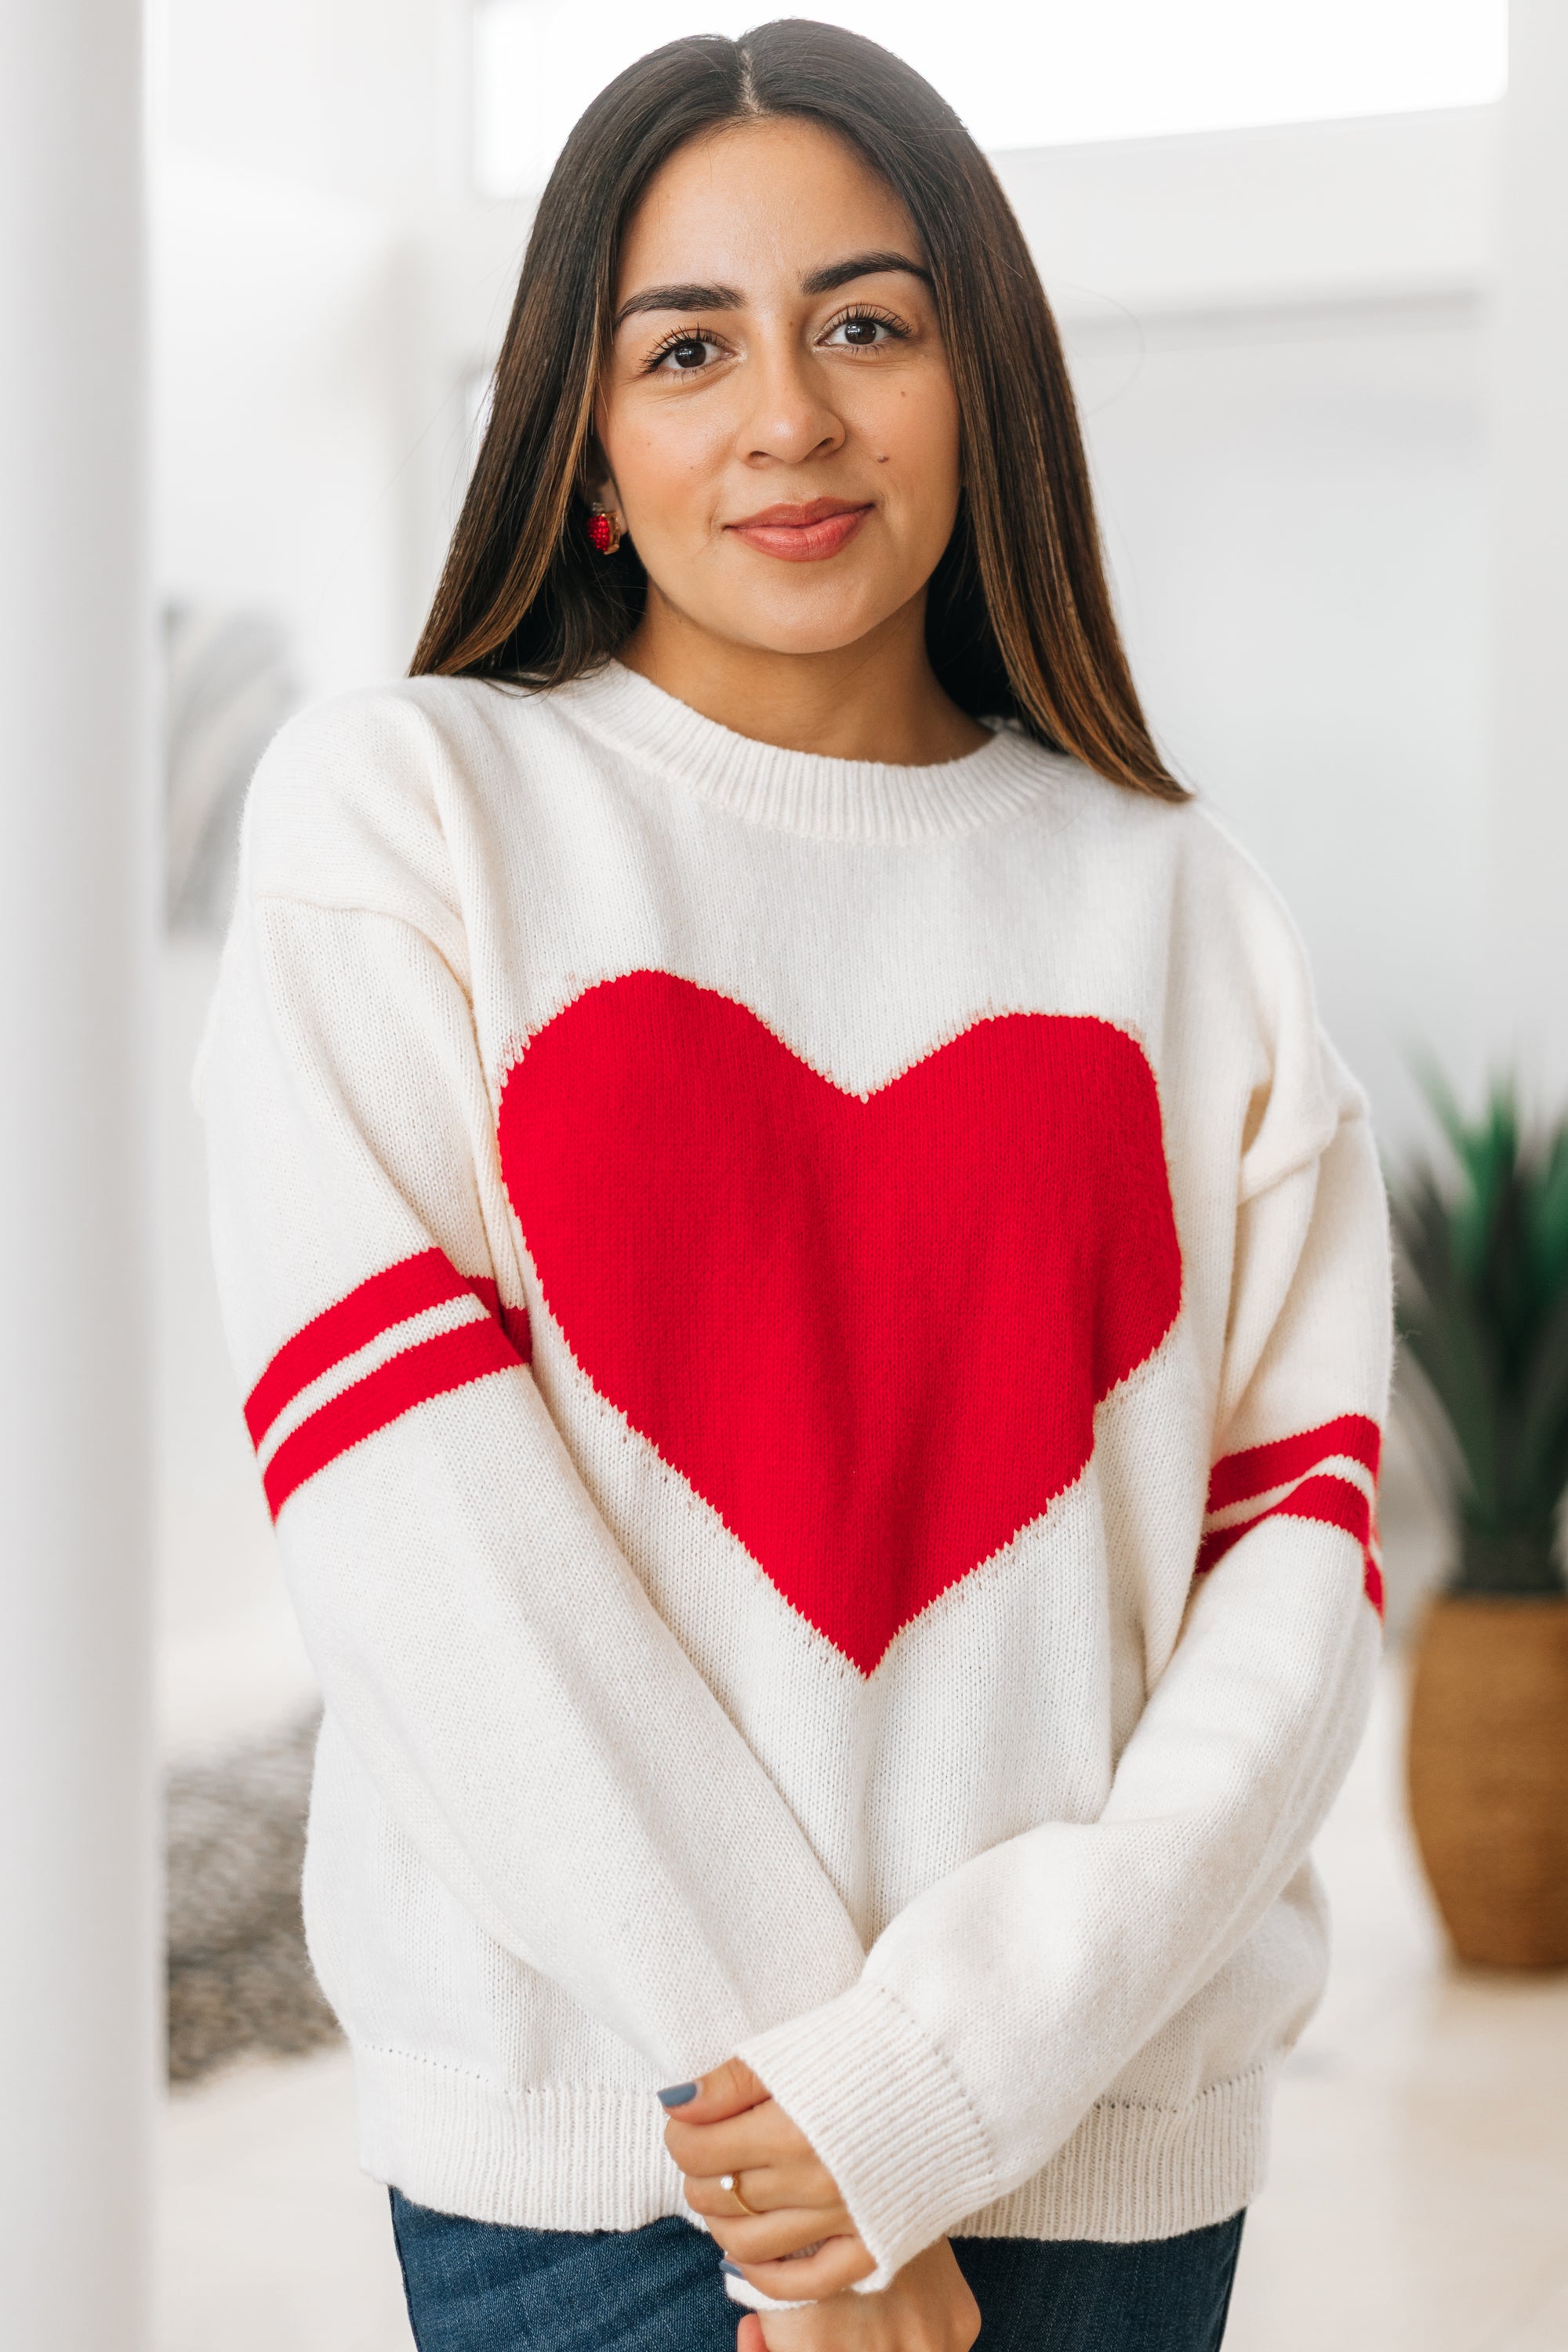 Big Center Heart With Double Striped Sleeve (SALE)